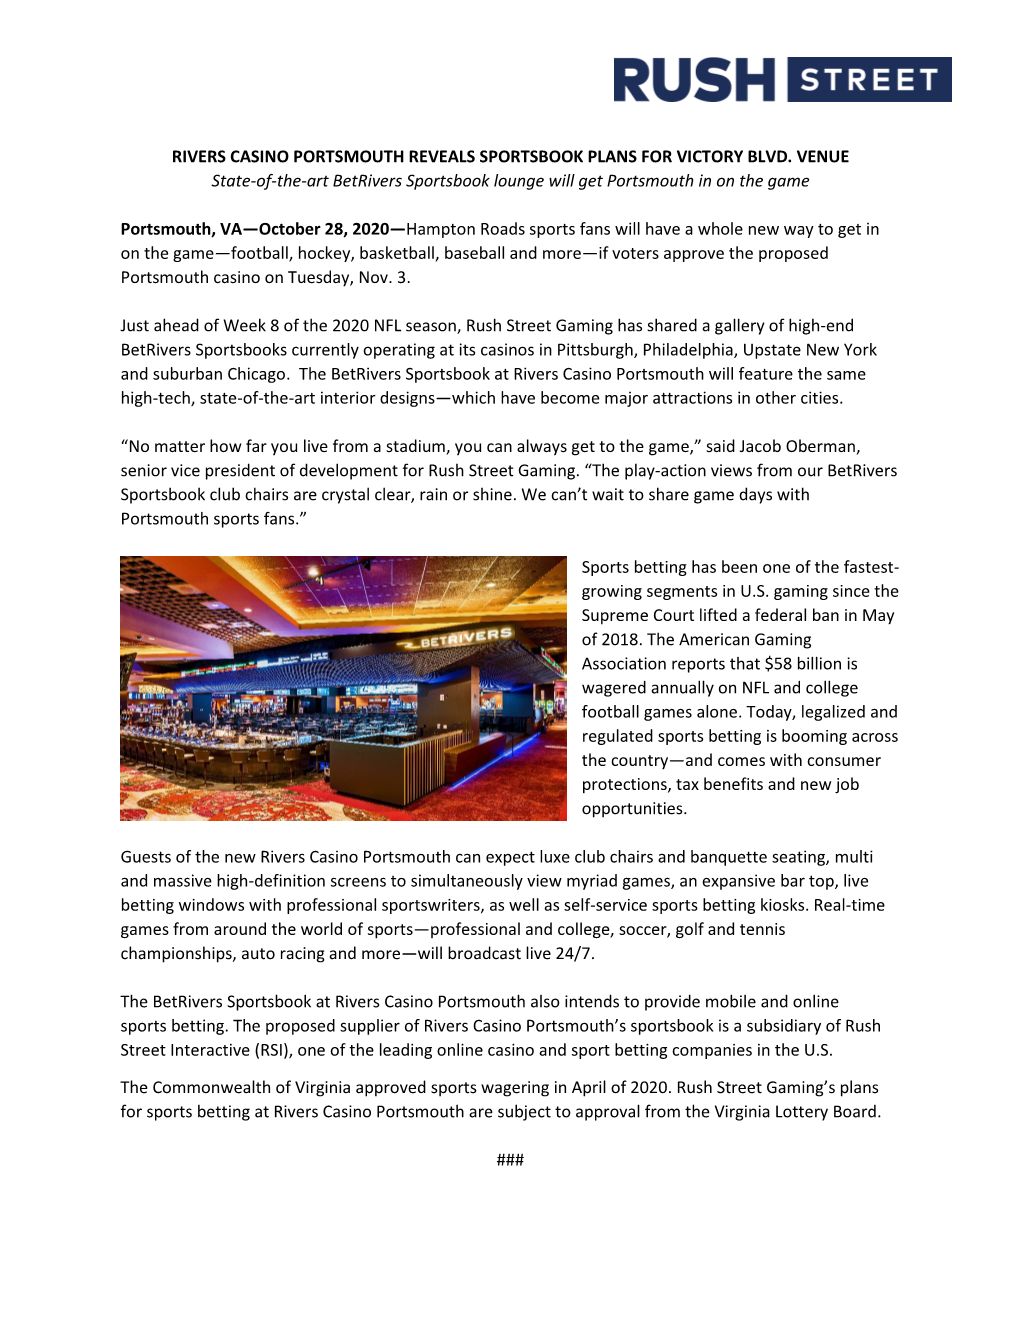 RIVERS CASINO PORTSMOUTH REVEALS SPORTSBOOK PLANS for VICTORY BLVD. VENUE State-Of-The-Art Betrivers Sportsbook Lounge Will Get Portsmouth in on the Game